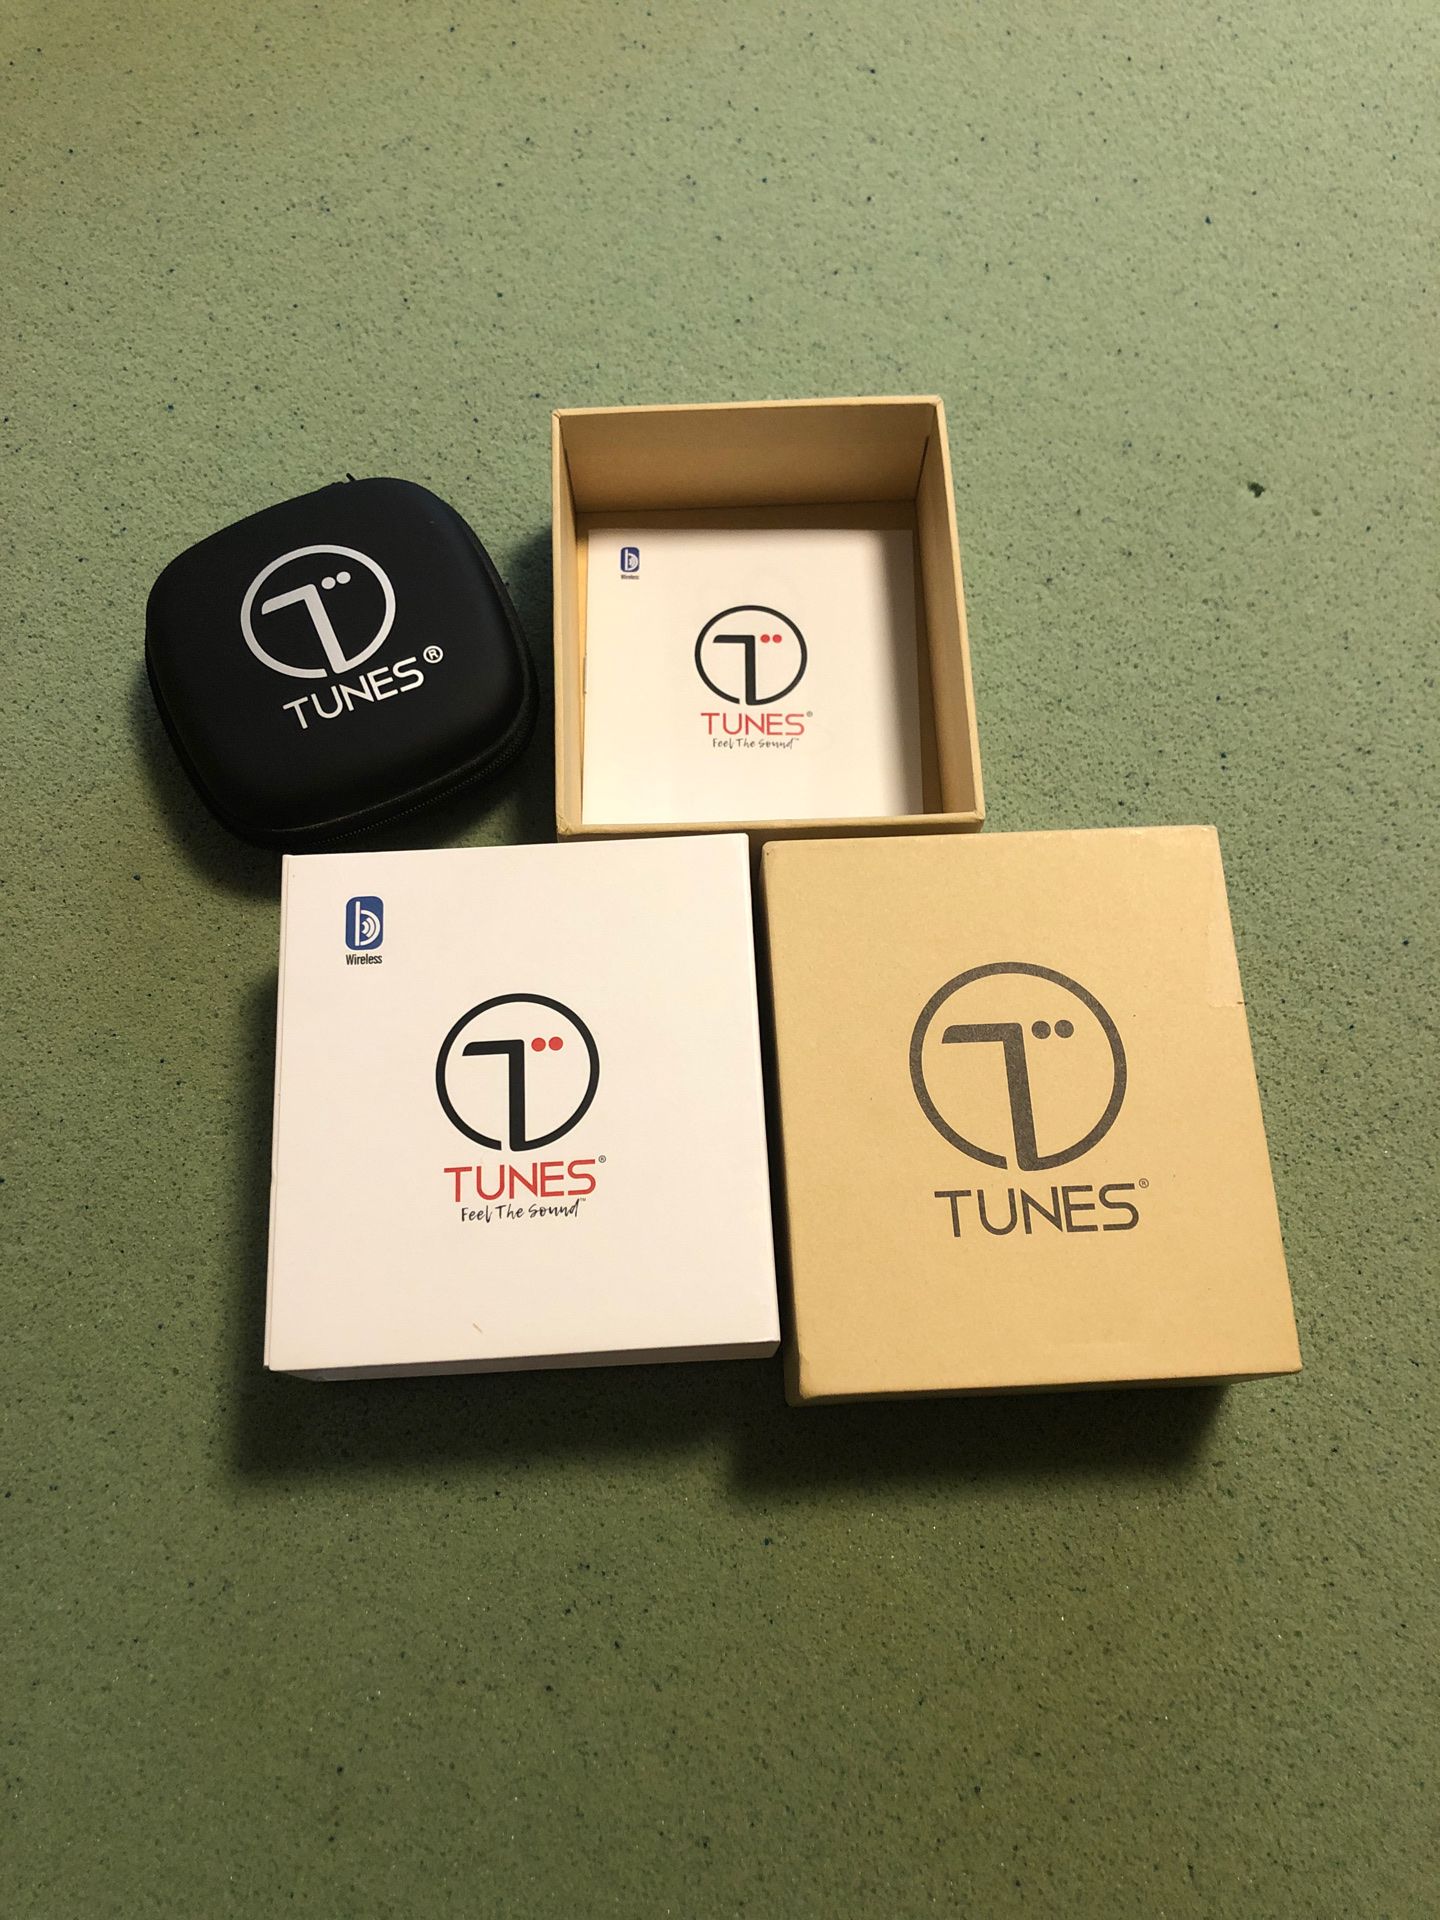 Tunes Bluetooth earbuds